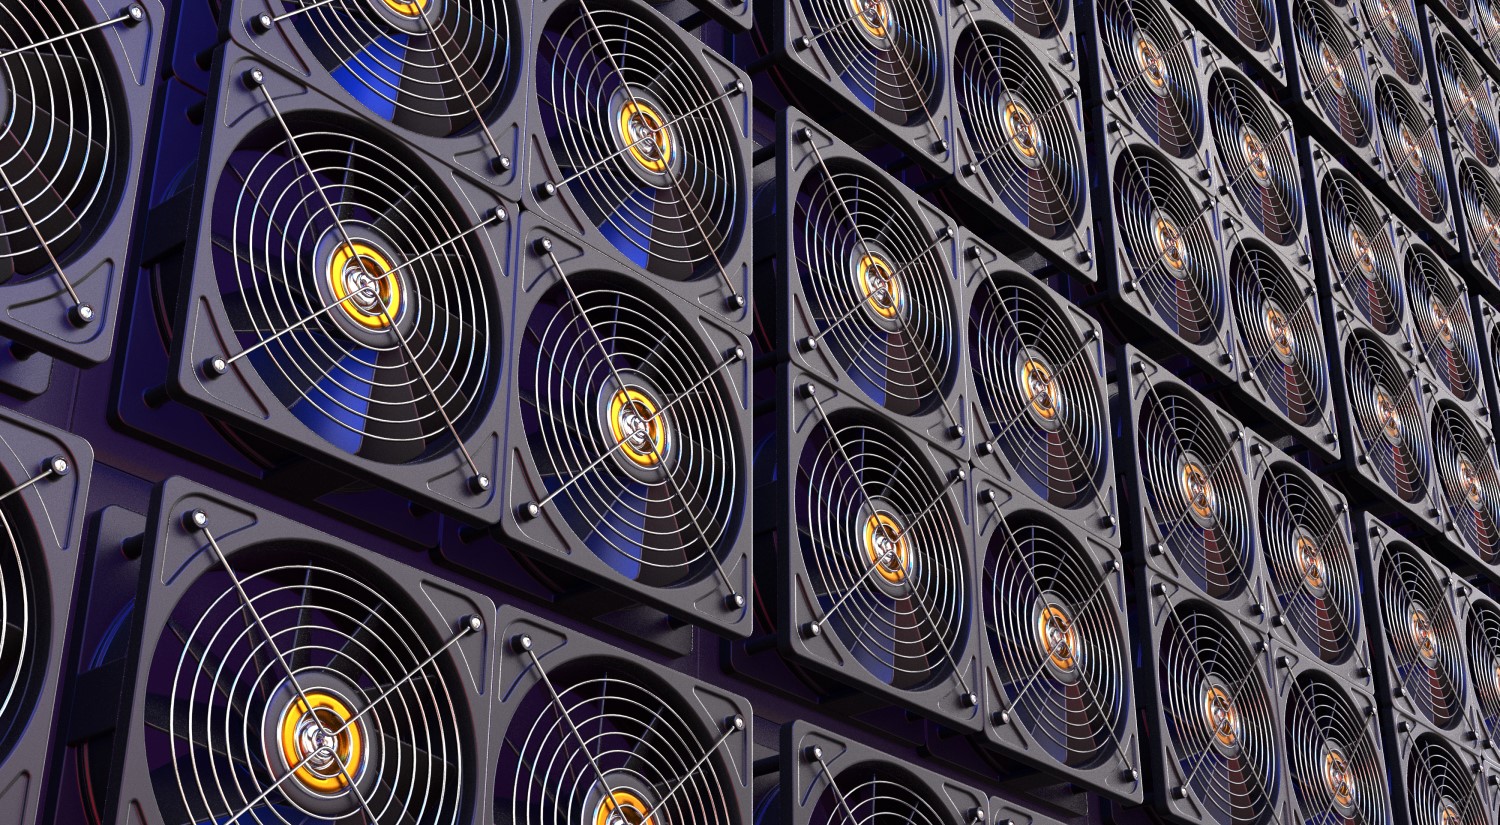 Bitcoin-miner-hut-8-closes-better-than-expected-equity-round-at-$8.3m